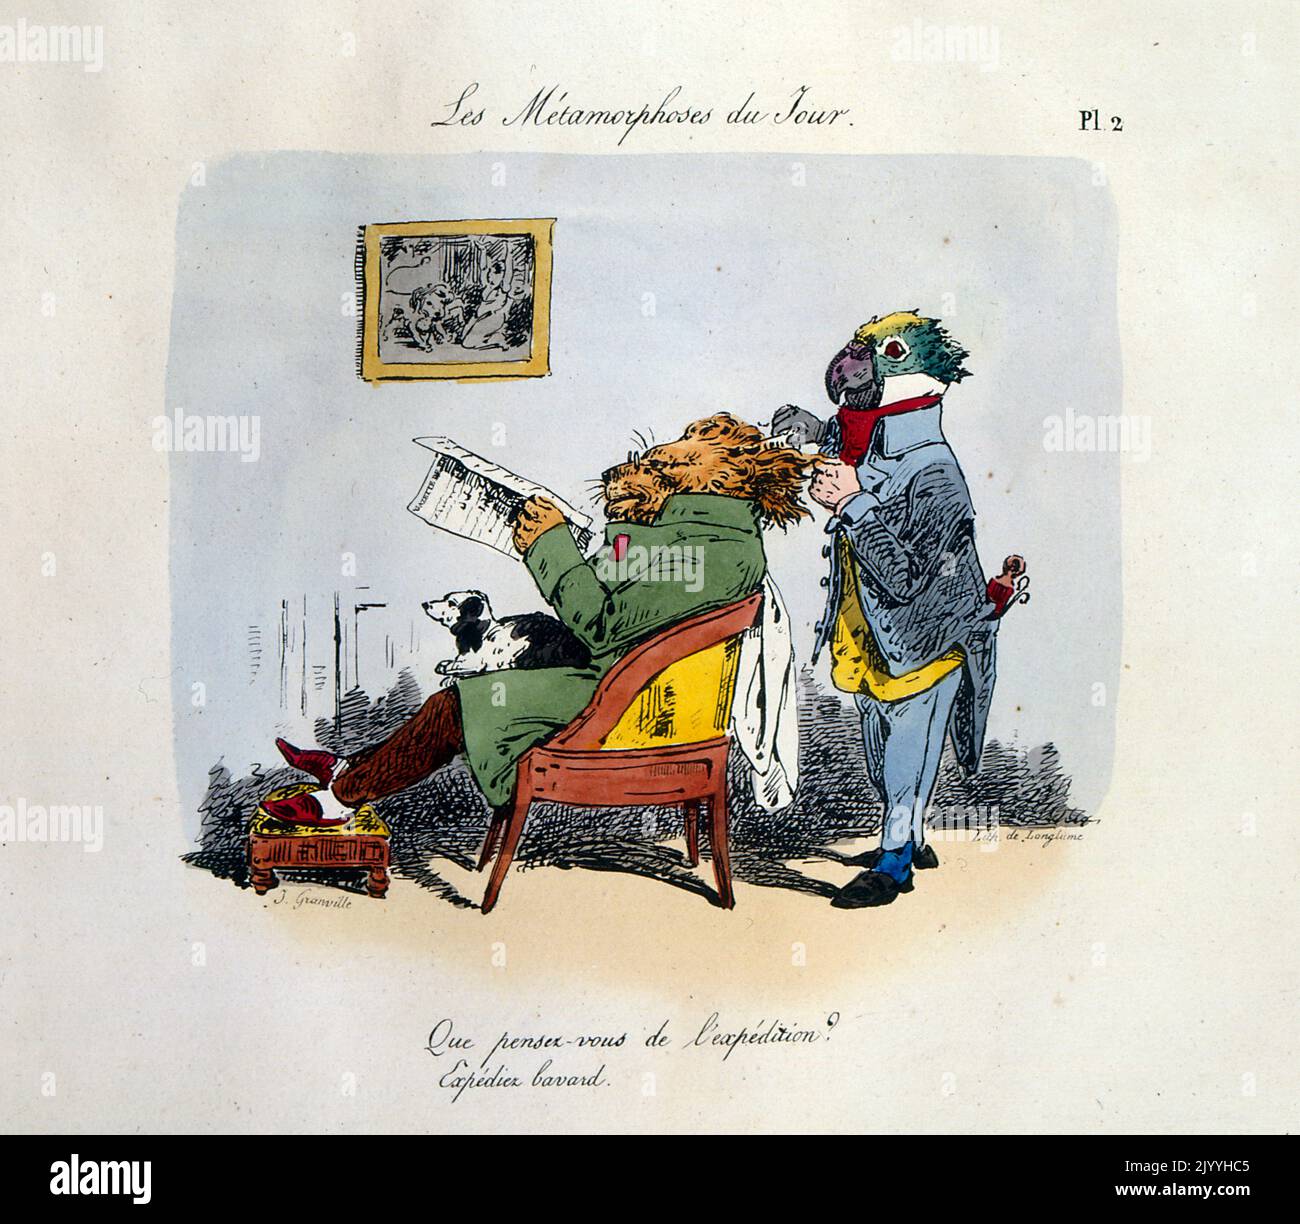 Coloured satirical Illustration depicting a lion dressed in human clothing sitting on a chair with his feet on a footstool and dog on his lap. A picture on the wall shows a lion tamer with a lion. A parrot is doing the lion's hair saying 'What do you think of the expedition?', by Pierre Langlume (1790-1830), French artist. Stock Photo